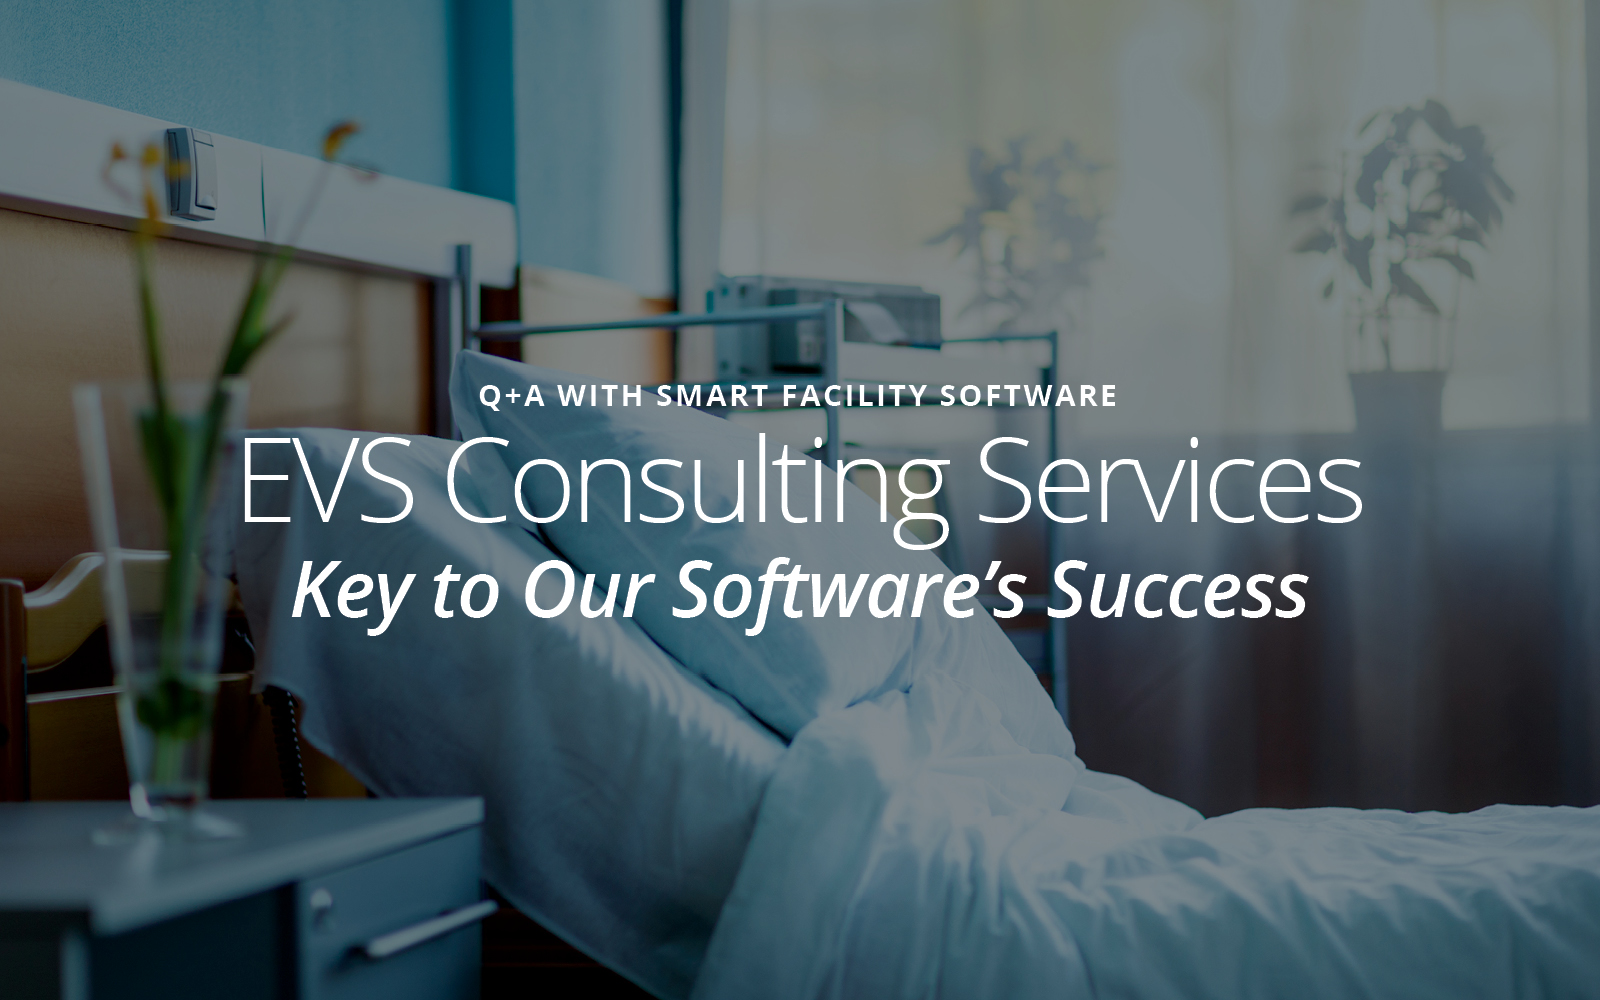 EVS Consulting Services: Key To Our Software's Success